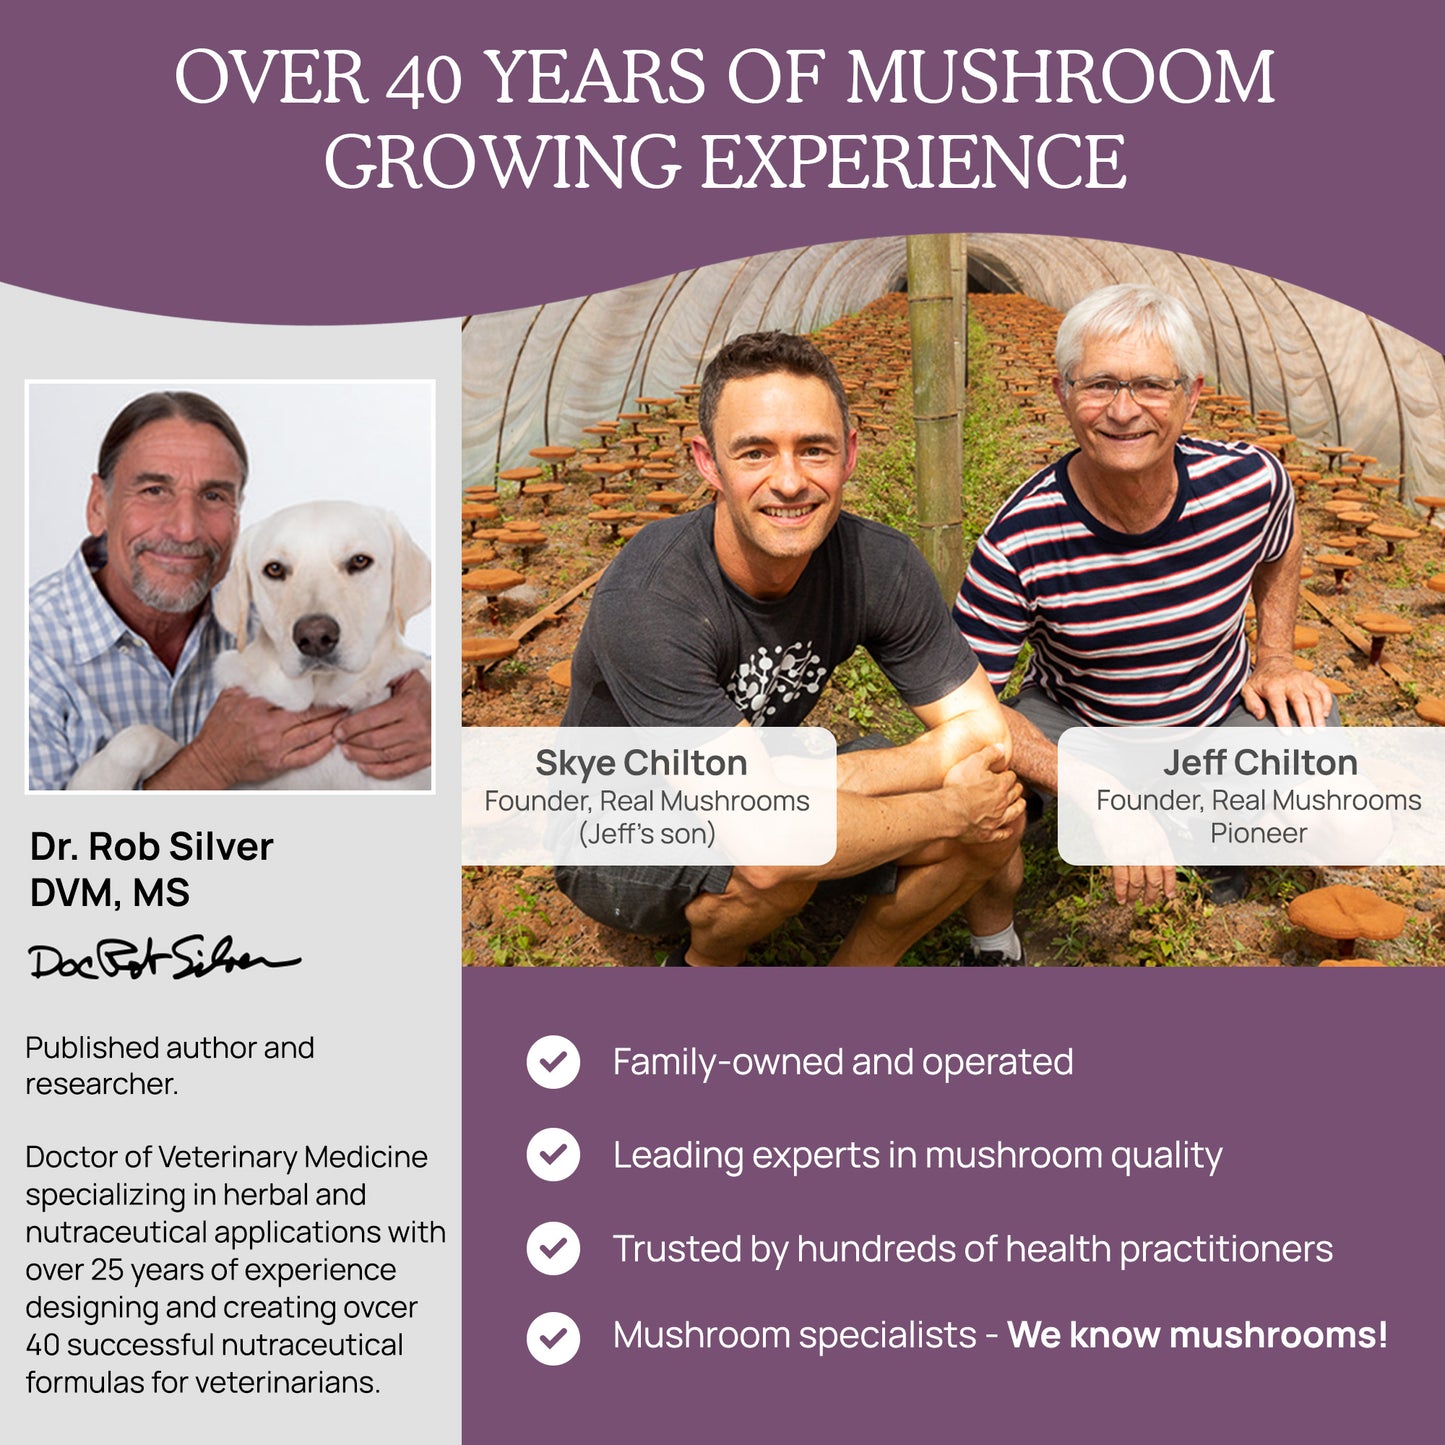 The image showcases three individuals associated with a company called Real Mushrooms, which specializes in growing mushrooms and producing USDA certified organic Chaga Extract Powder for Pets. Dr. Rob Silver, a published veterinarian with over 25